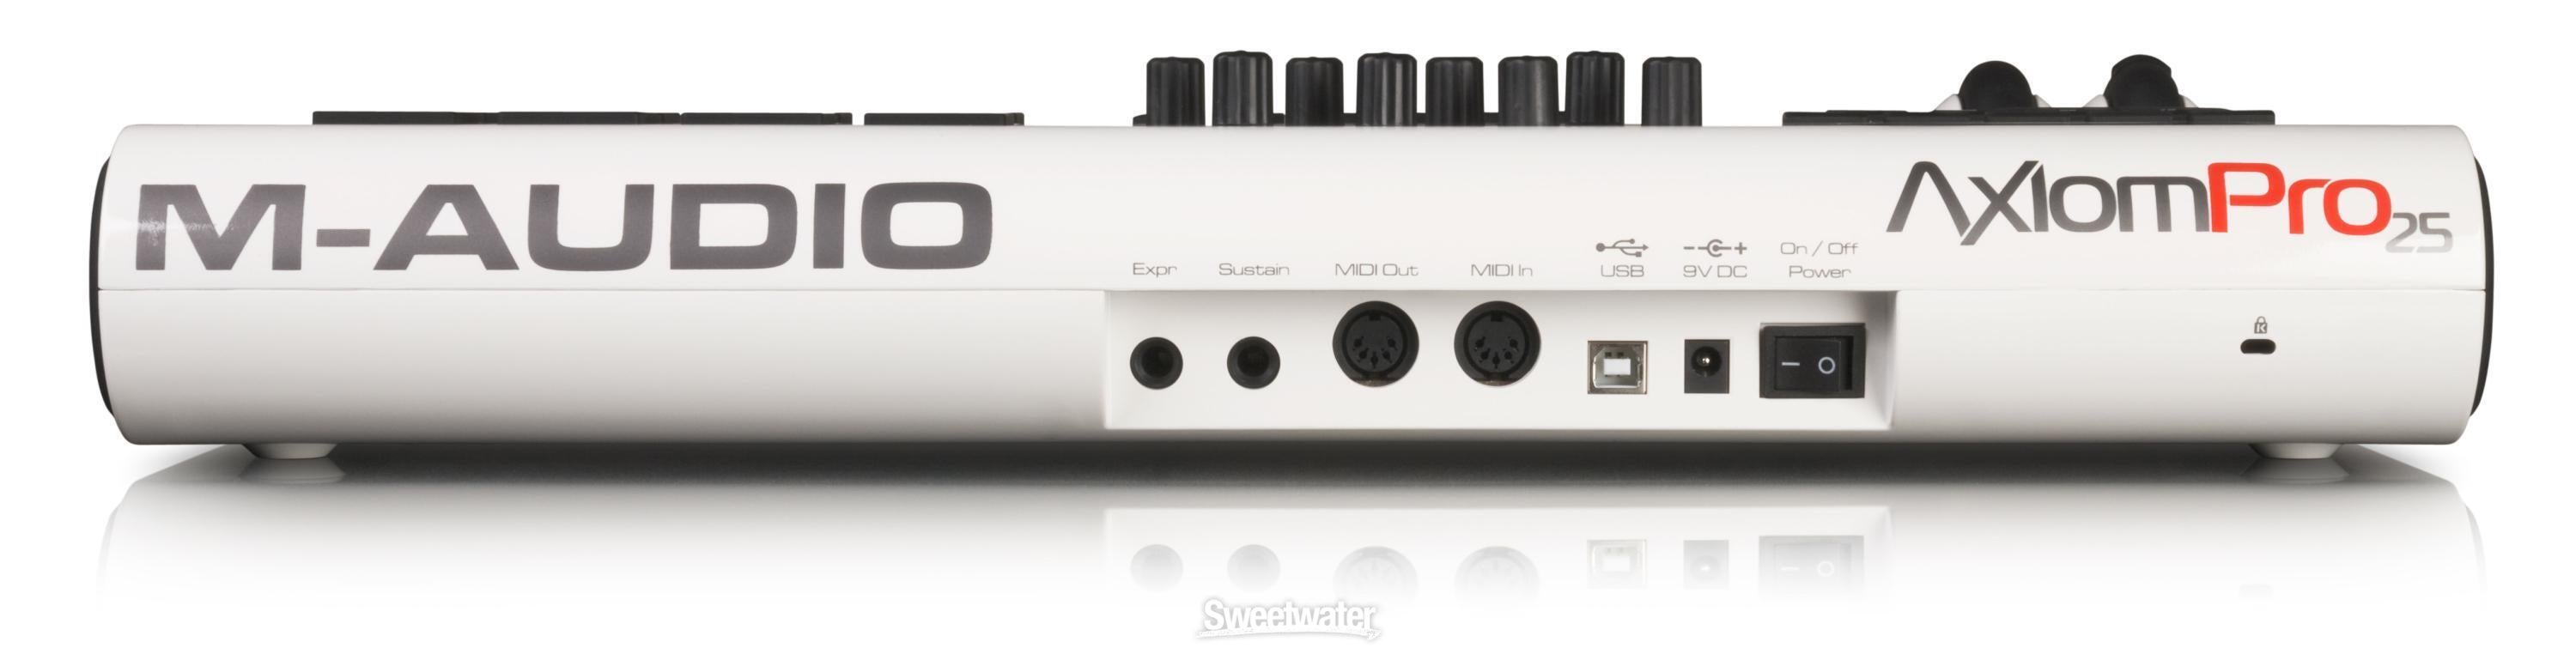 M-Audio Axiom Pro 25 | Sweetwater